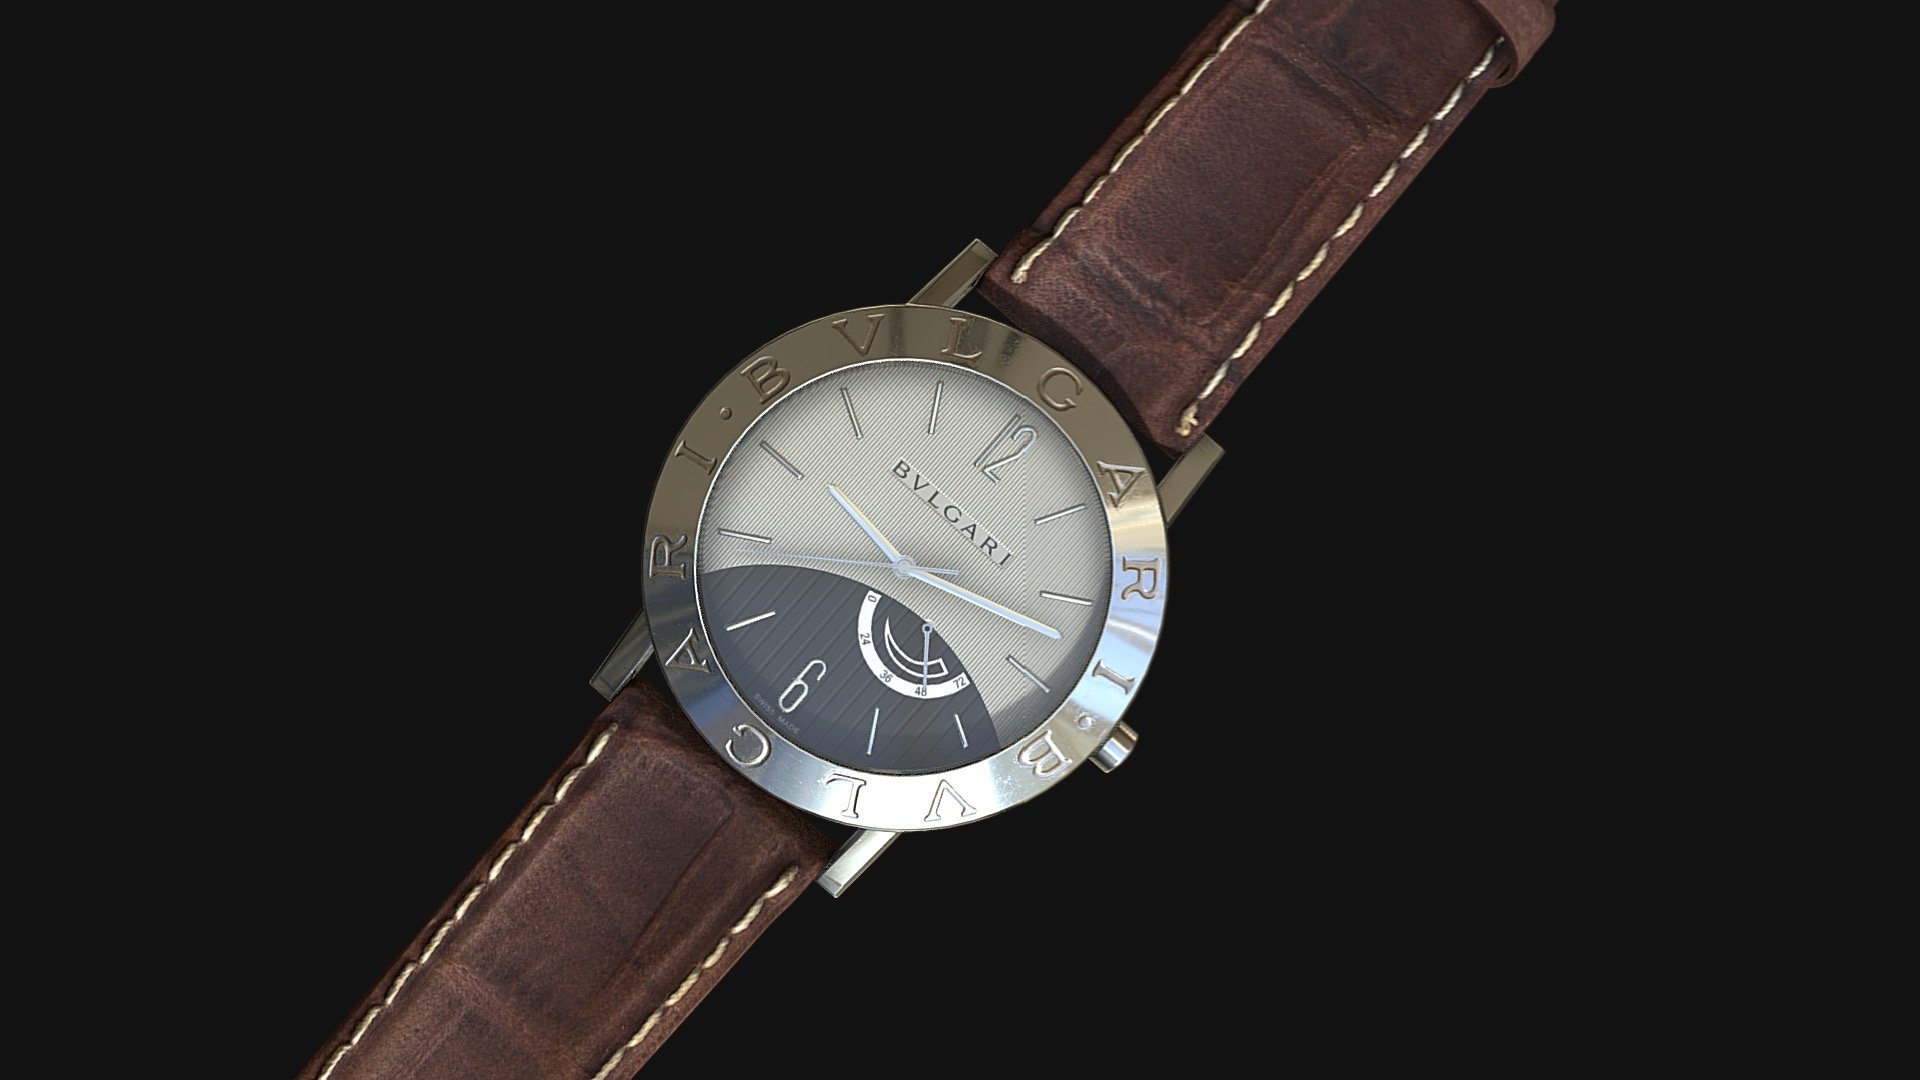 BVLGARI Watch
A classic BVLGARI watch with leather straps.

For commission work, please contact: info@arvify.com - BVLGARI Watch - 3D model by Arvify 3d model